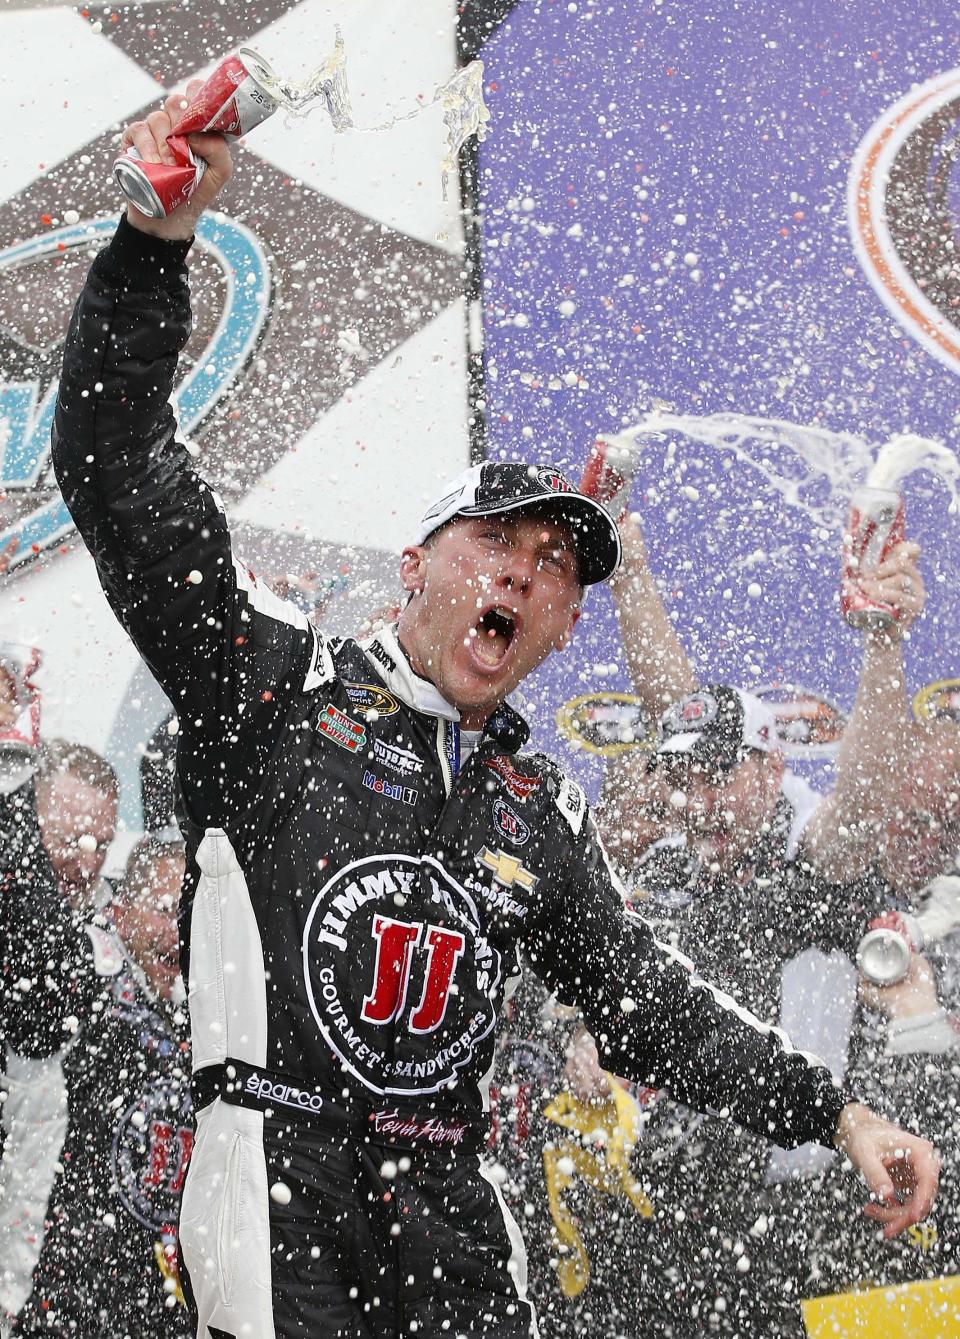 Kevin Harvick celebrates in Victory Lane with his crew after winning the NASCAR Sprint Cup Series auto race Sunday, March 2, 2014, in Avondale, Ariz. (AP Photo/Ross D. Franklin)